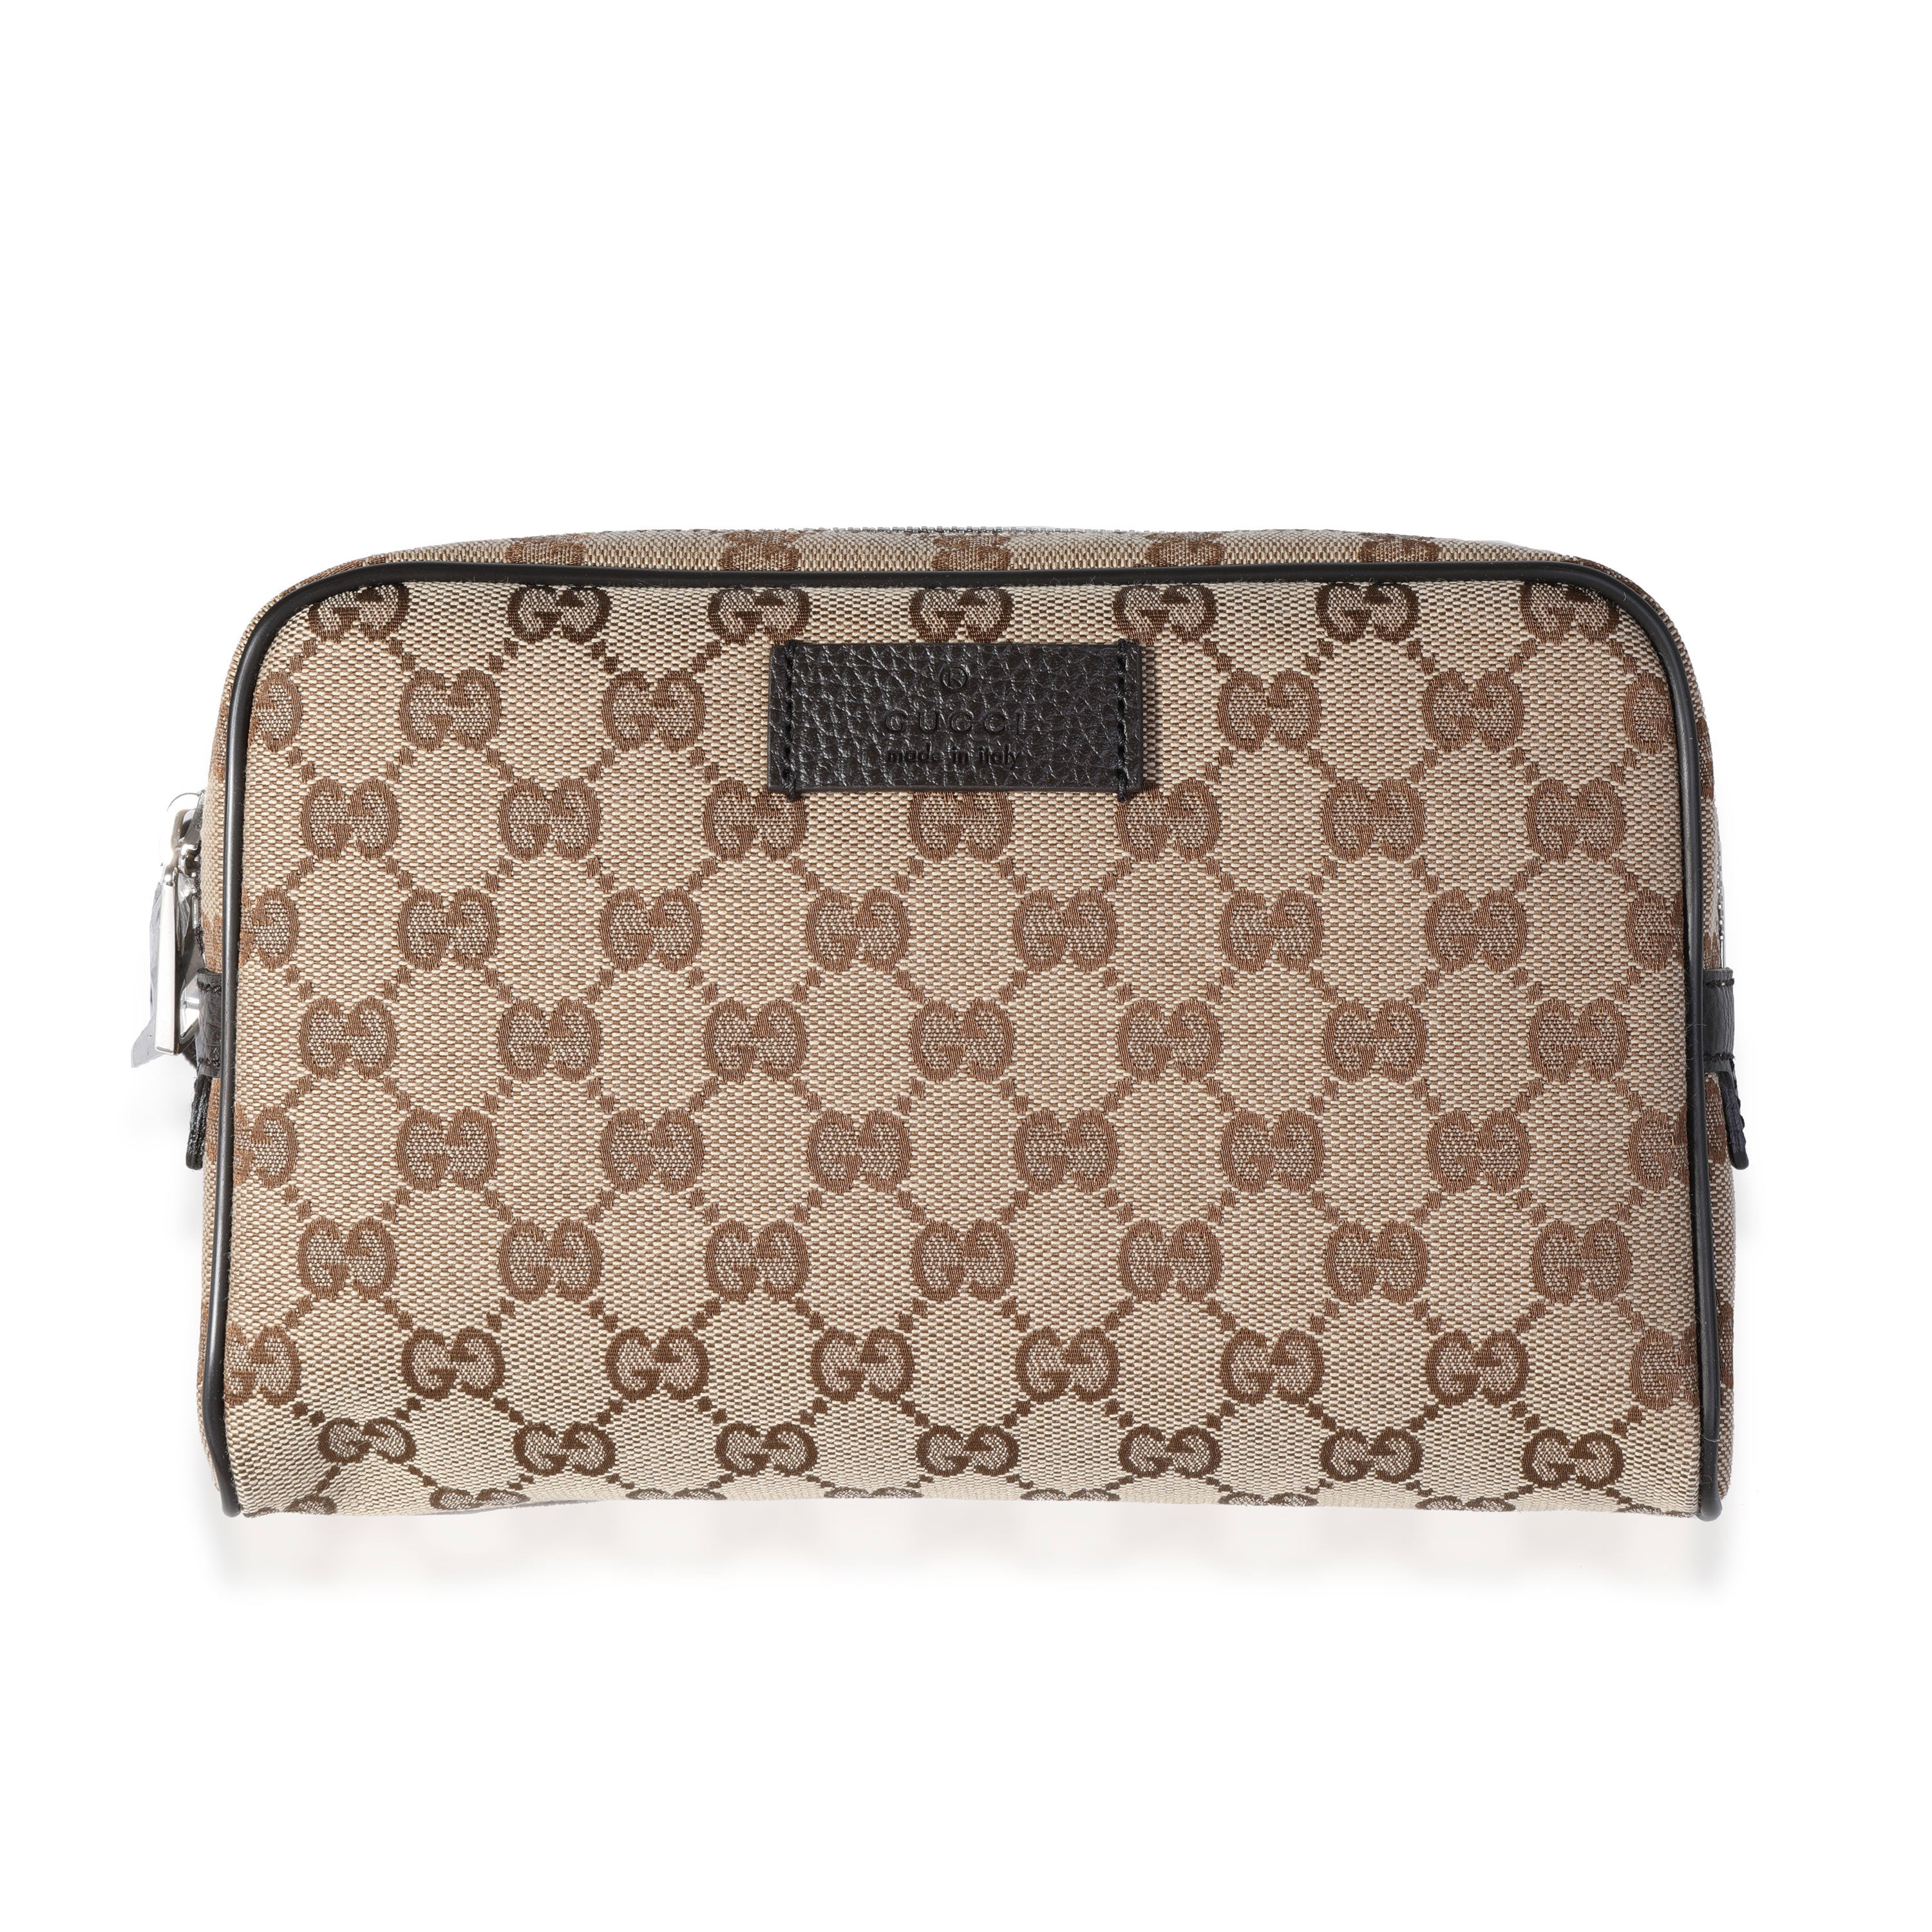 GUCCI BELT BAG CANVAS - clothing & accessories - by owner - apparel sale -  craigslist